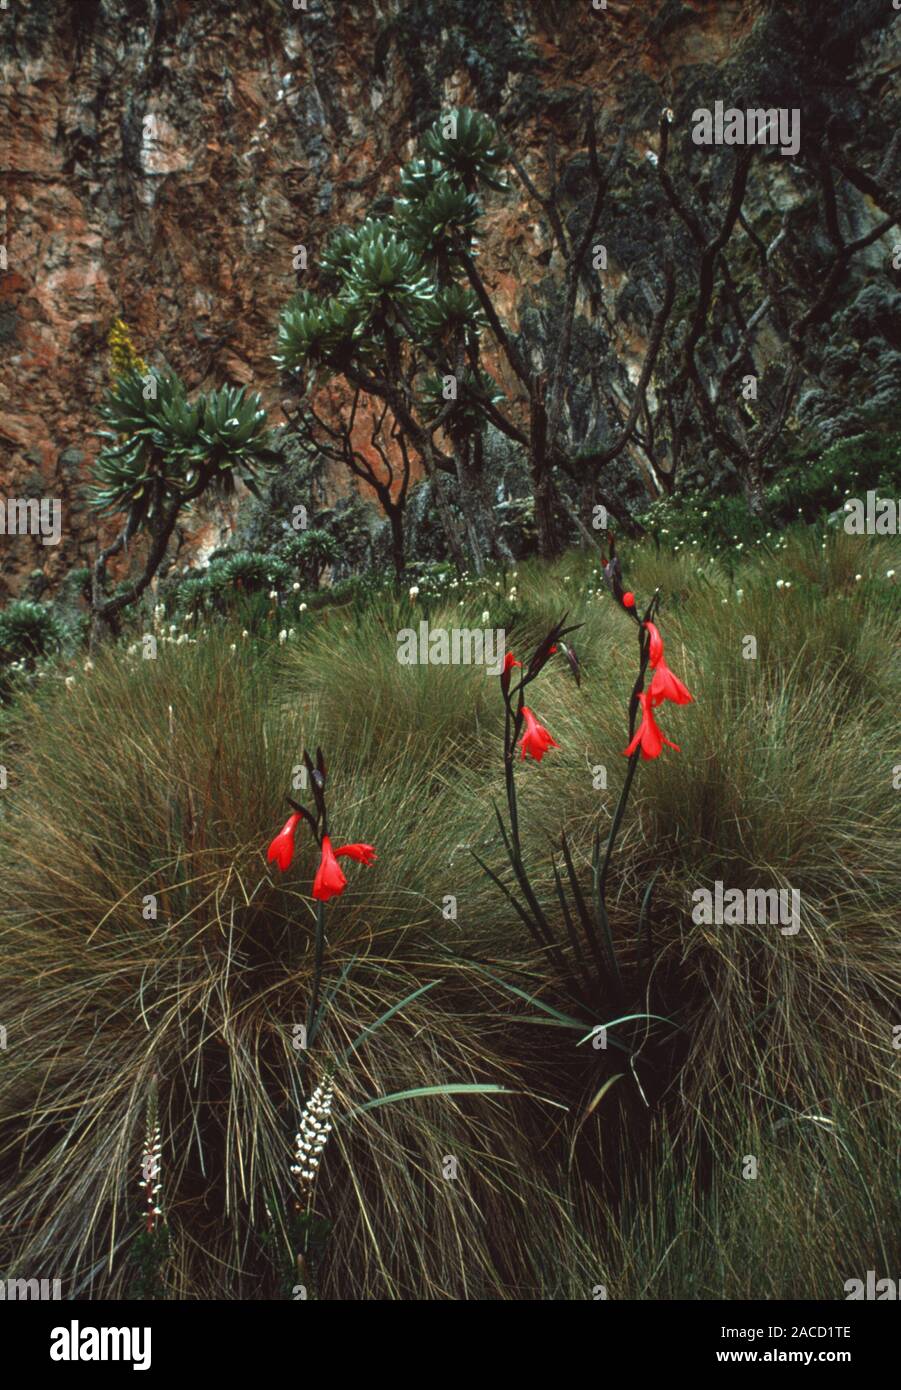 Mackinder's gladiolus (Gladiolus watsonoides, red flowers). This plant is found growing in the grass tussocks and damp stony soils found on Mount Keny Stock Photo